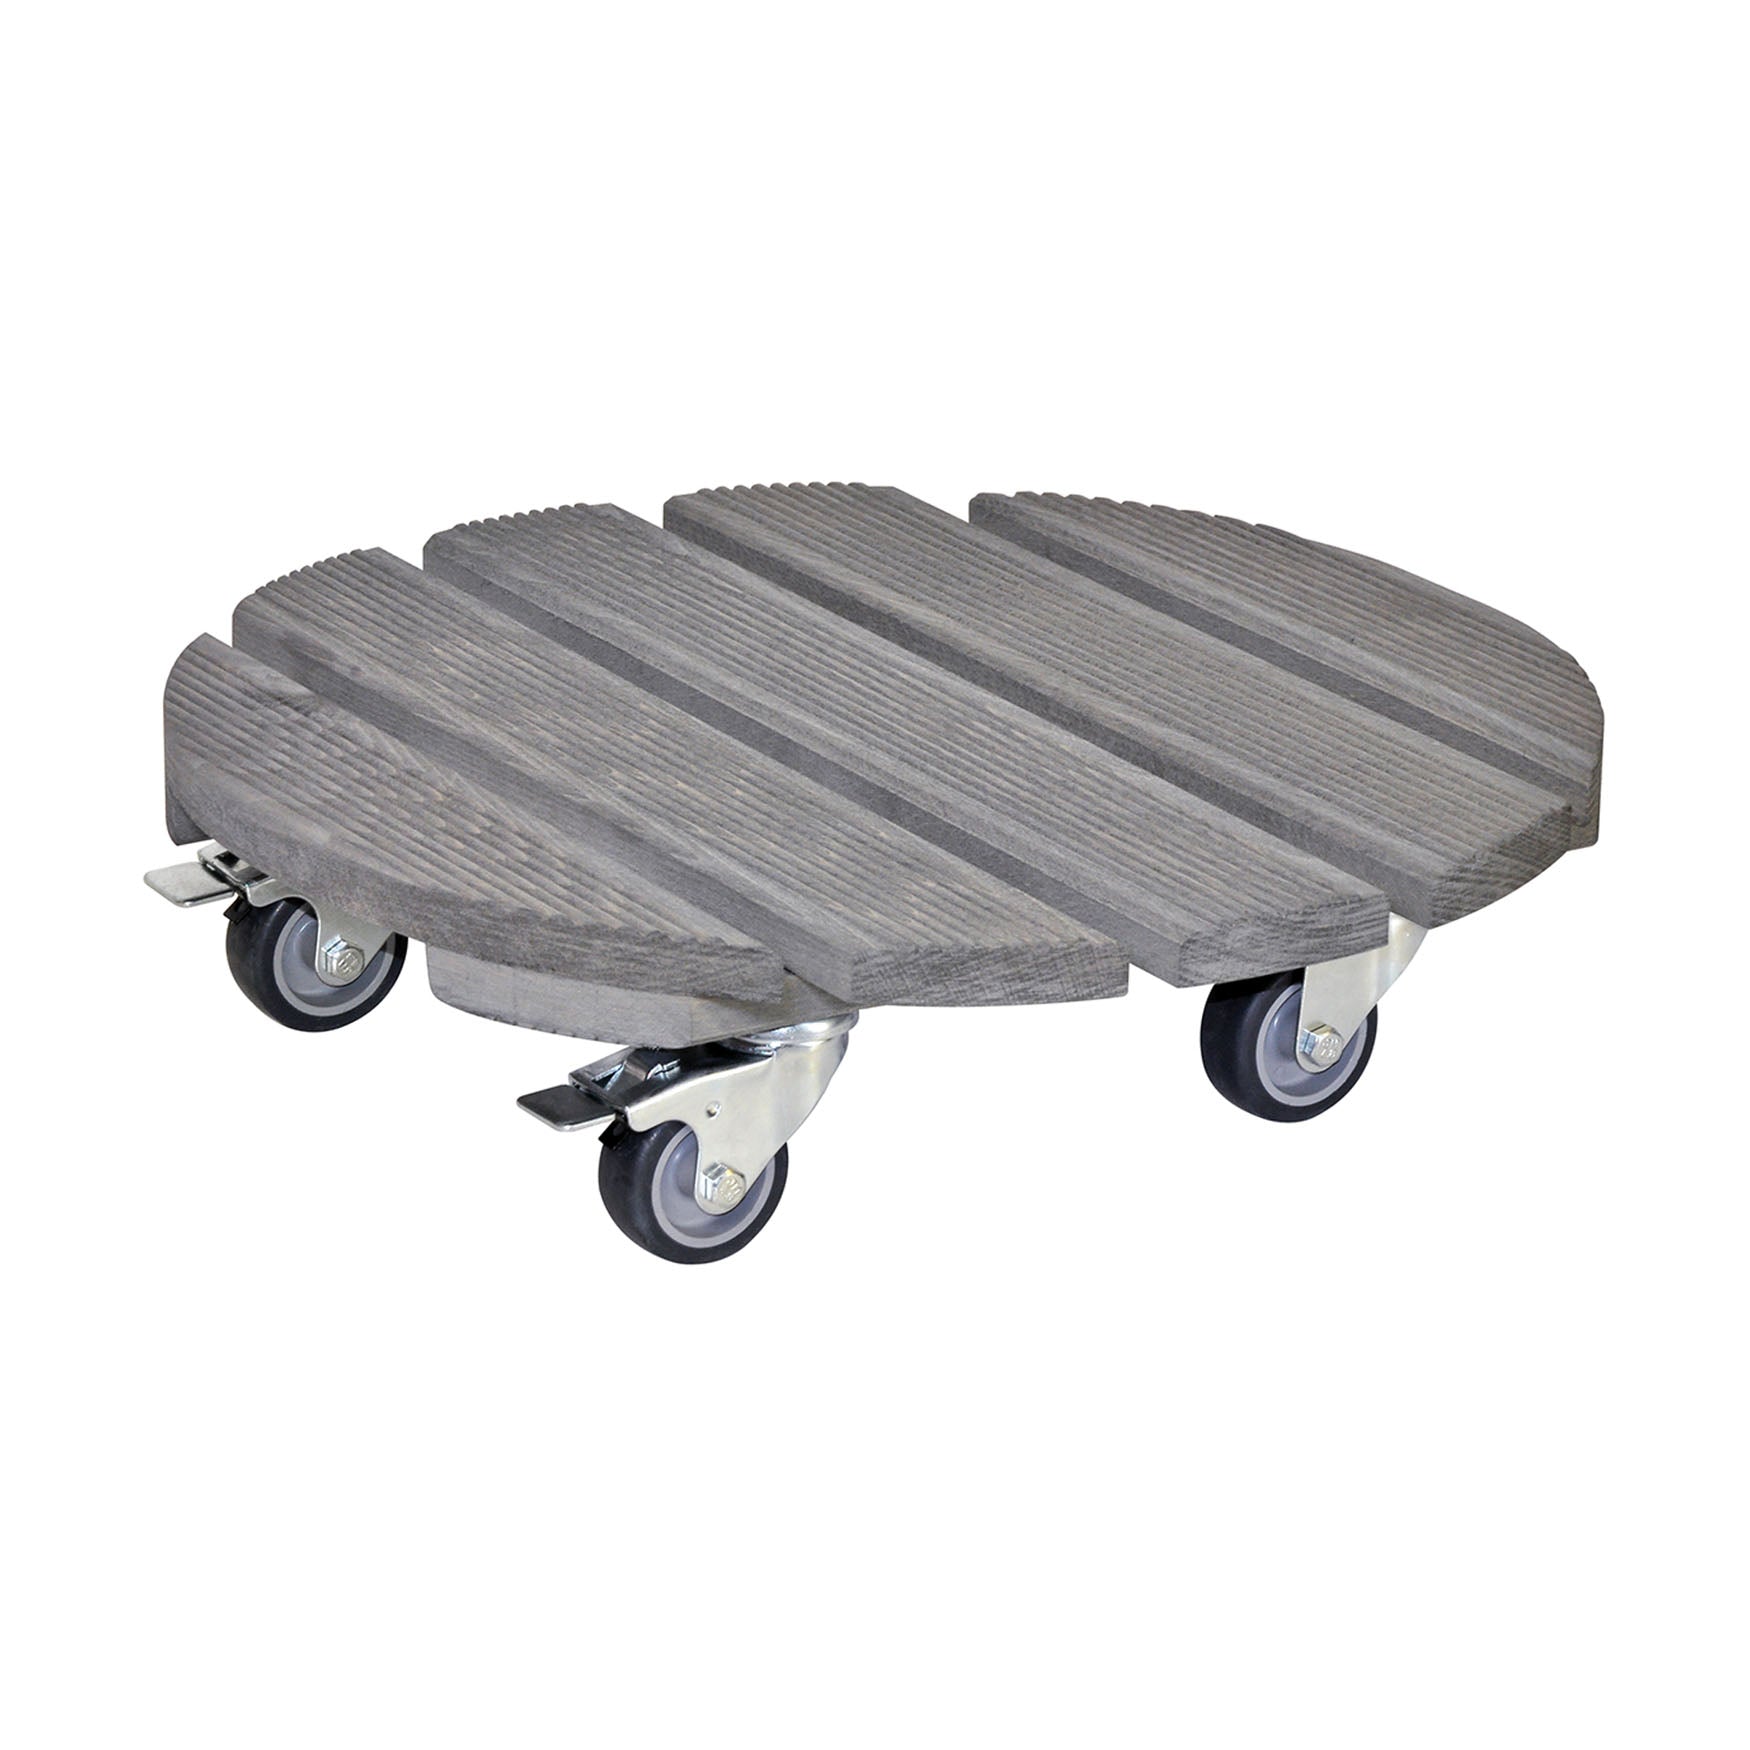 Gray Round Ribbed Plant Caddy with brakes. Made of beech wood. 441 lbs capacity. 15"D x 4"H 4.2 lbs.